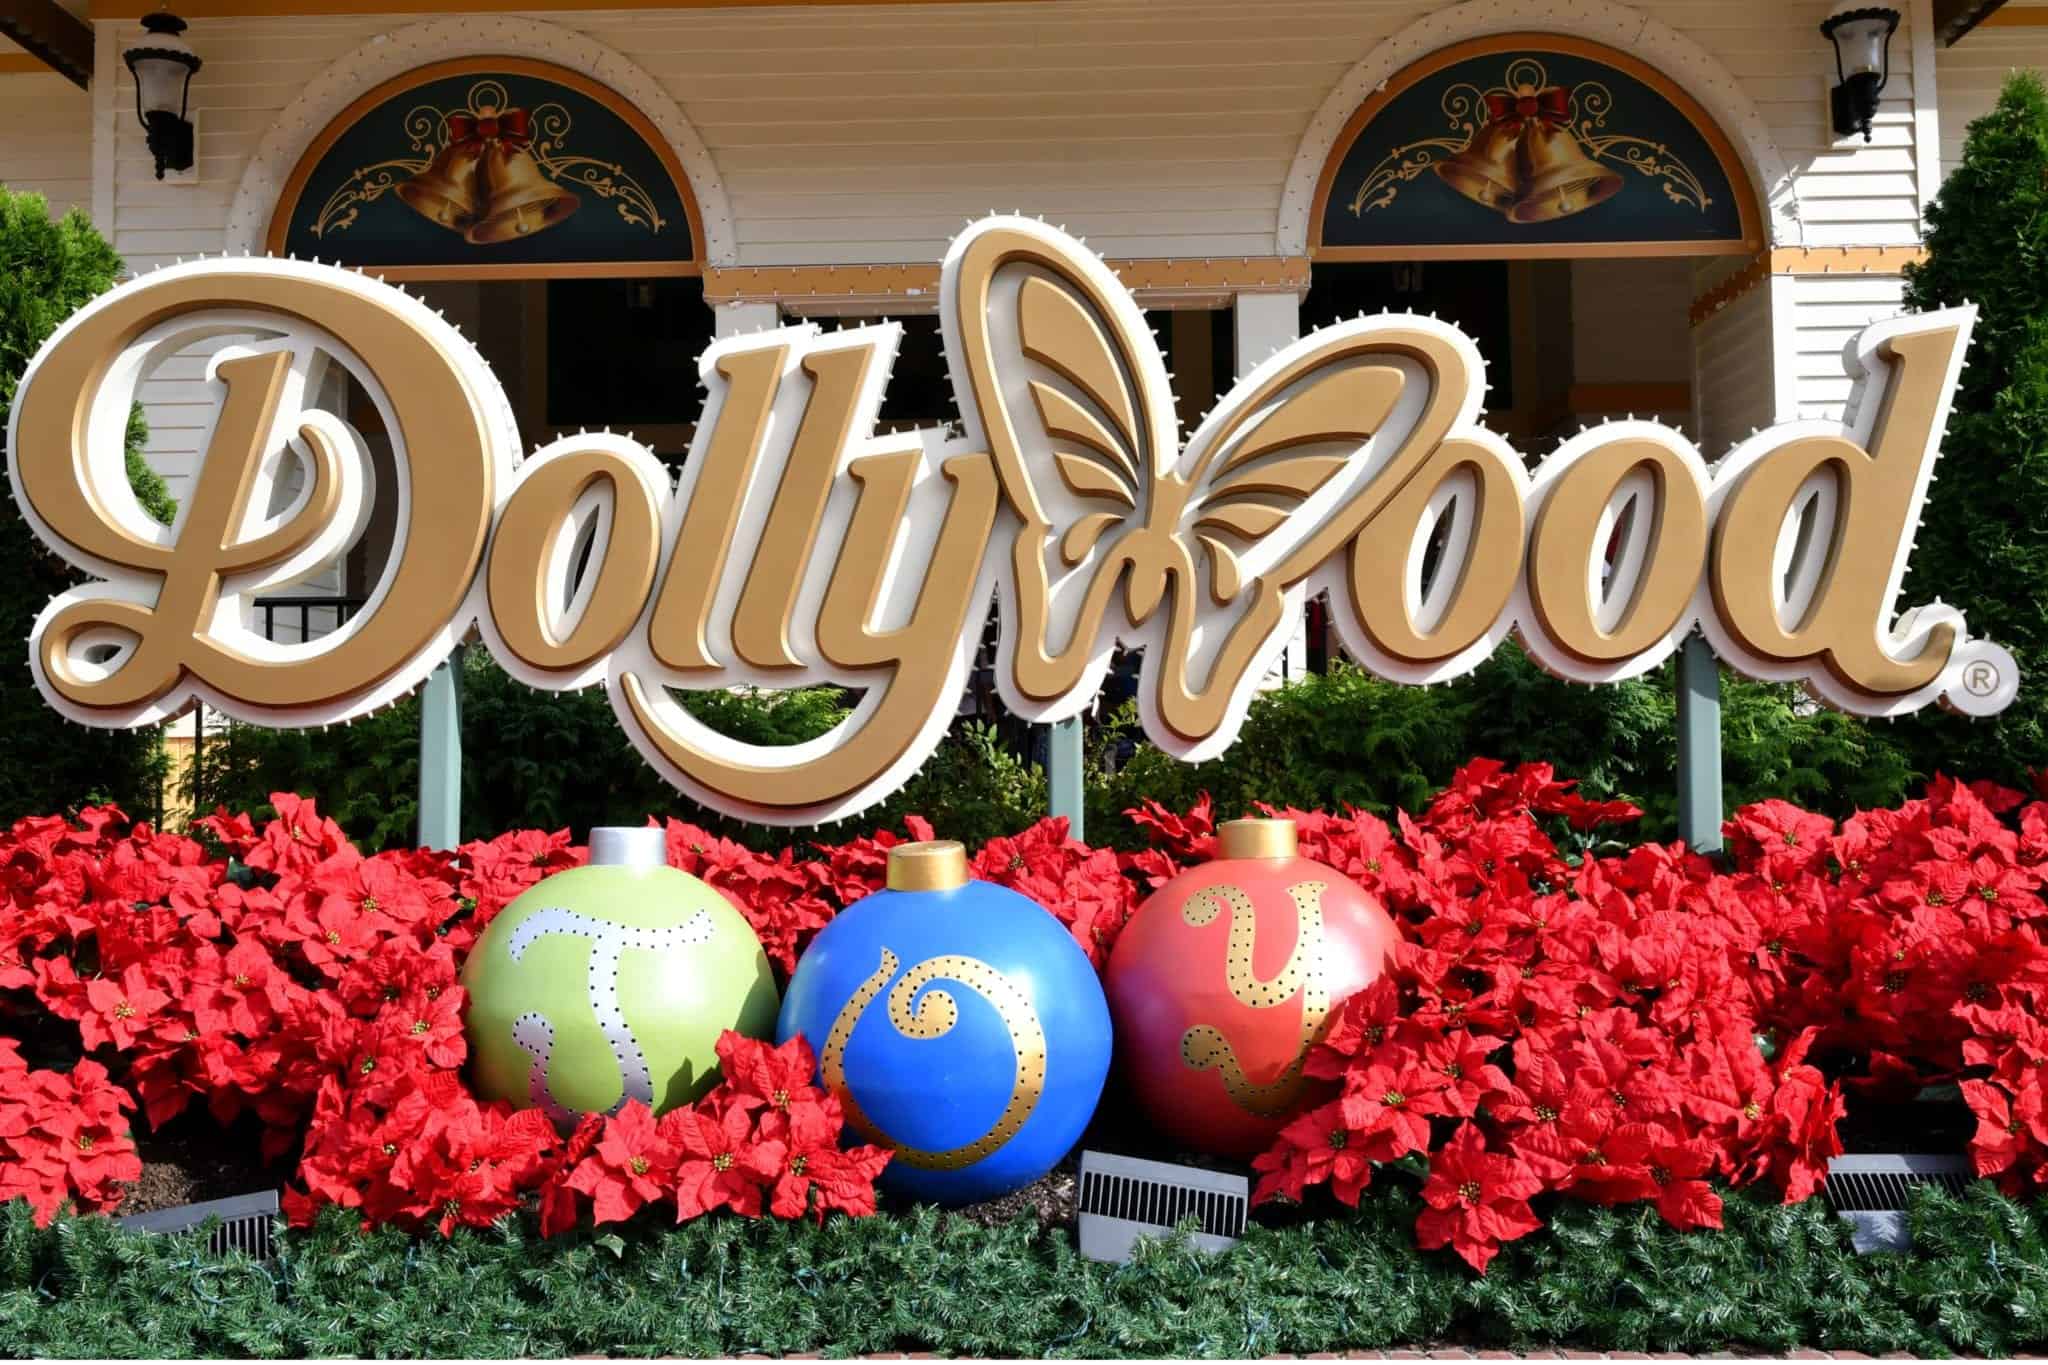 Top 4 Highlights of the Smoky Mountain Christmas at Dollywood